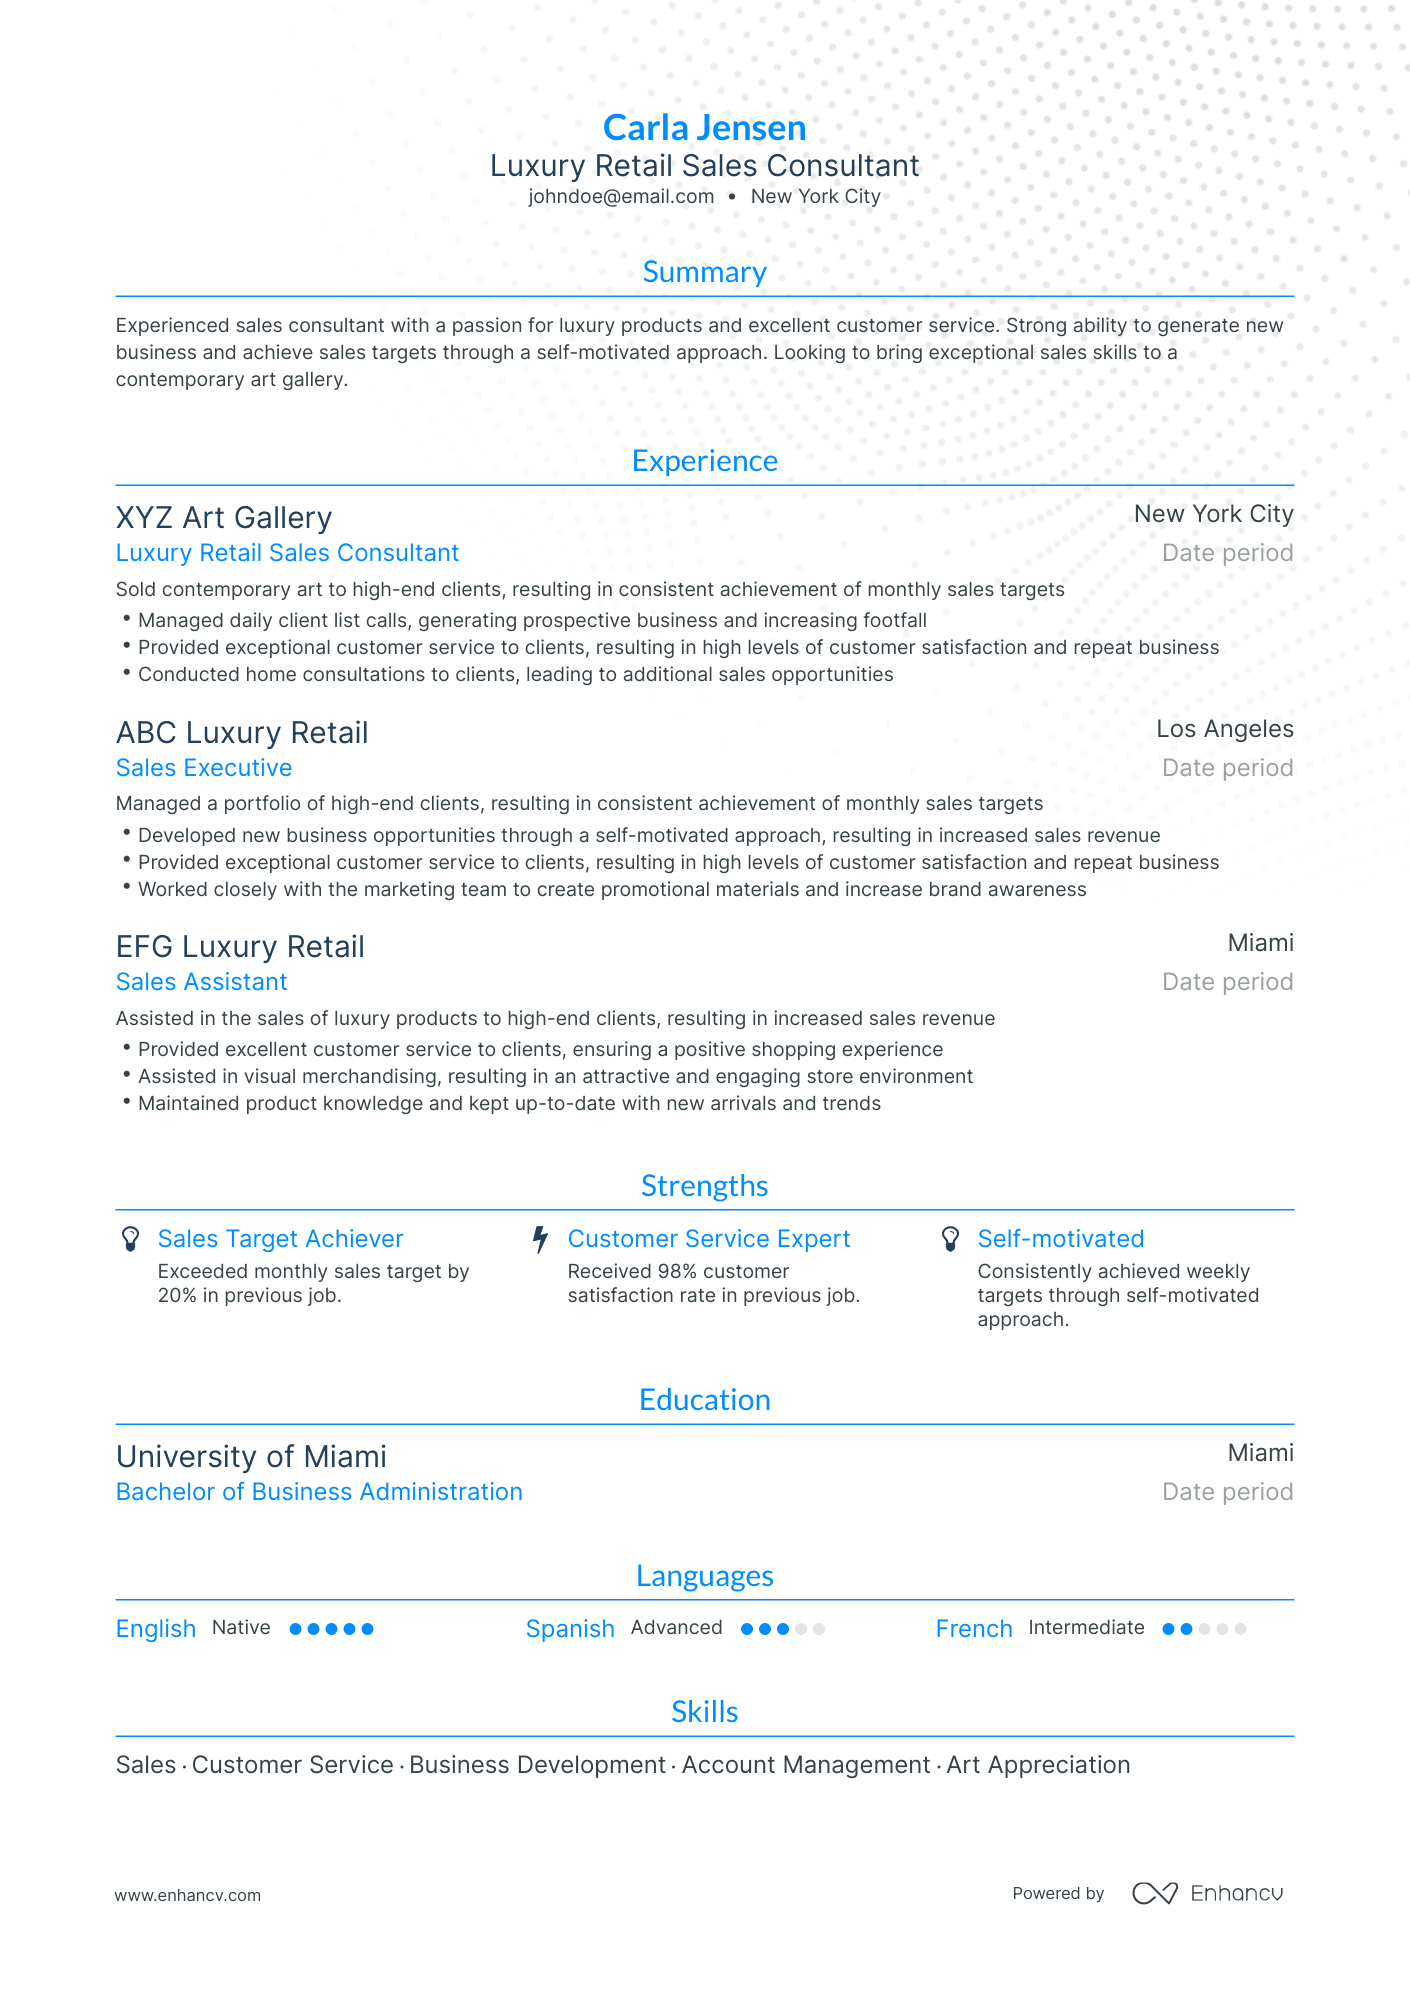 Traditional Retail Sales Consultant Resume Template